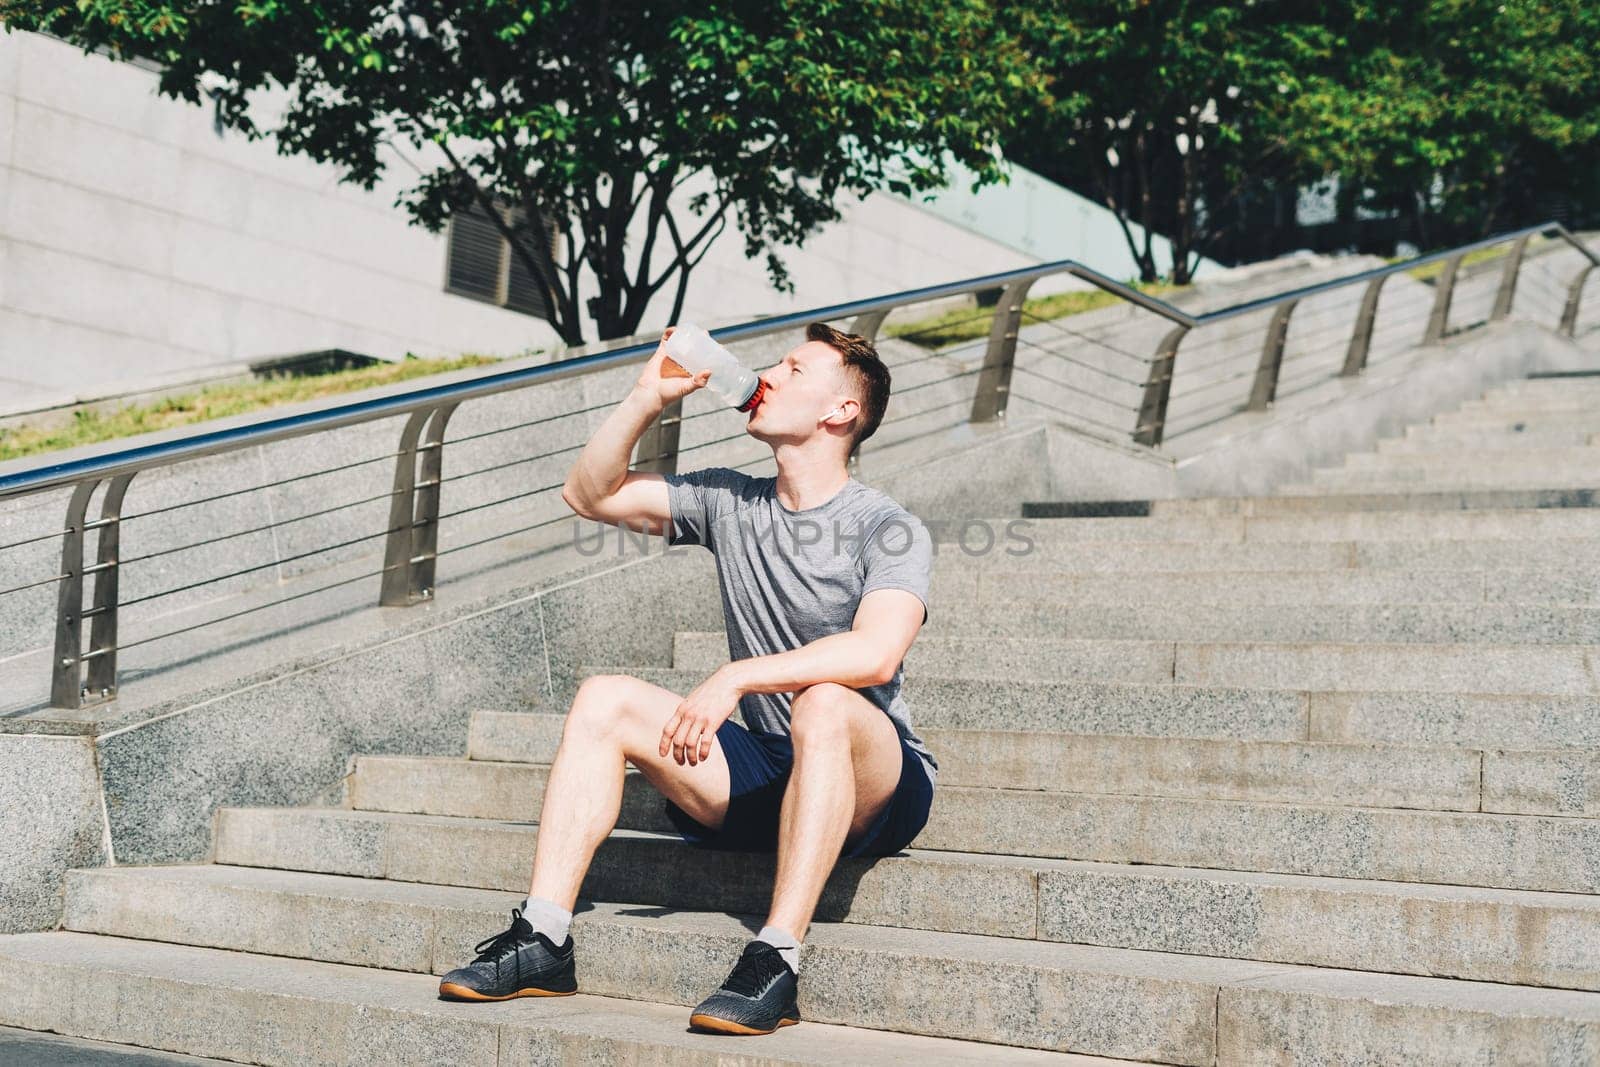 Tired Young man runner sitting on stairs and relaxing after sport training. Drinking water bottle while doing workout in summer city street